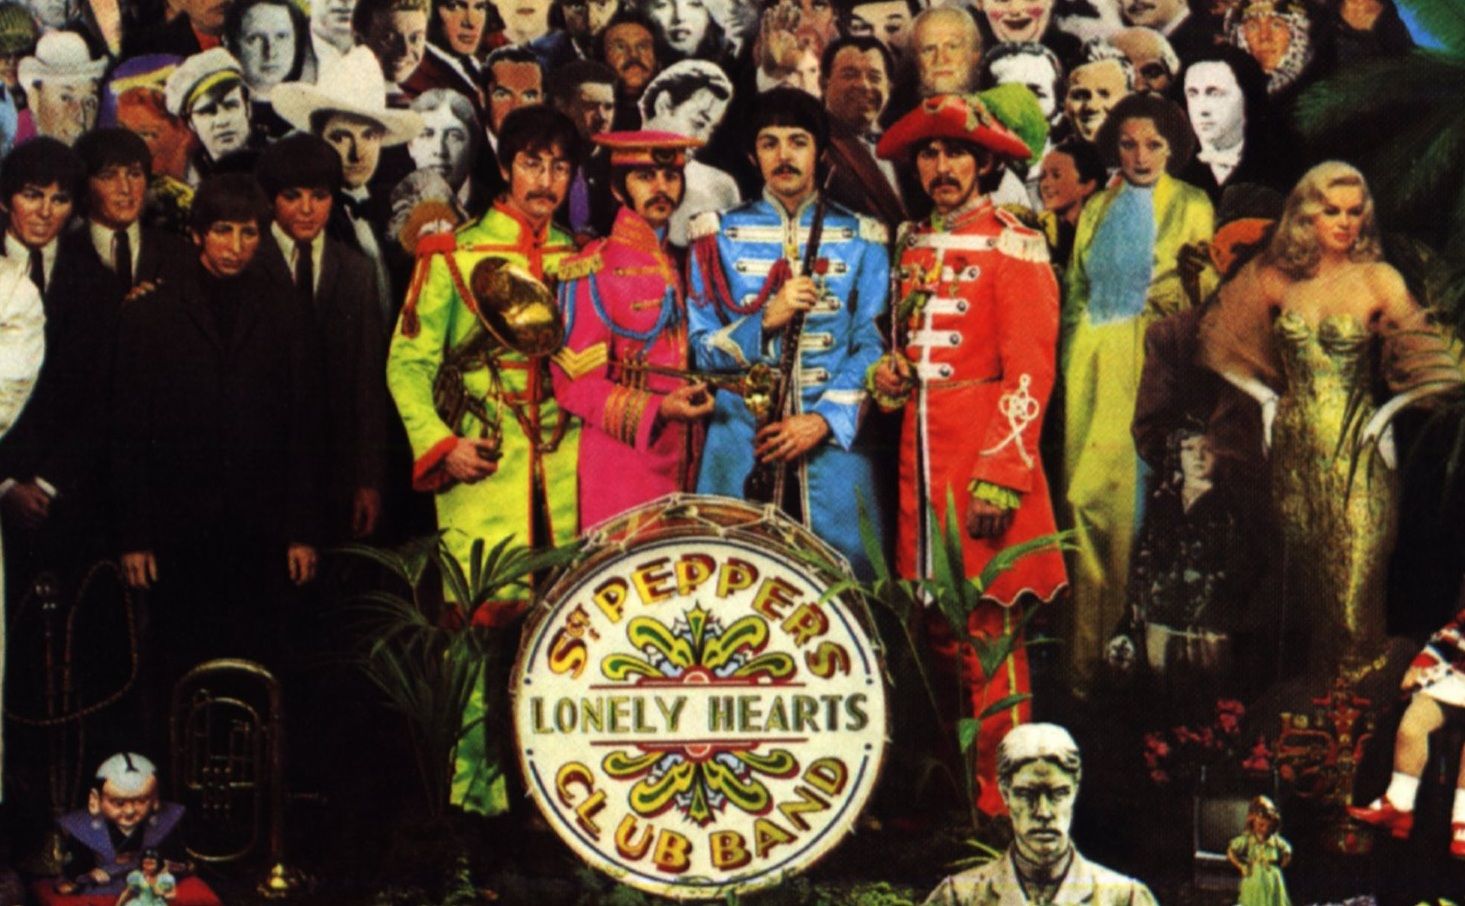 Sgt Peppers Lonely Hearts Club Band Wallpaper Ing